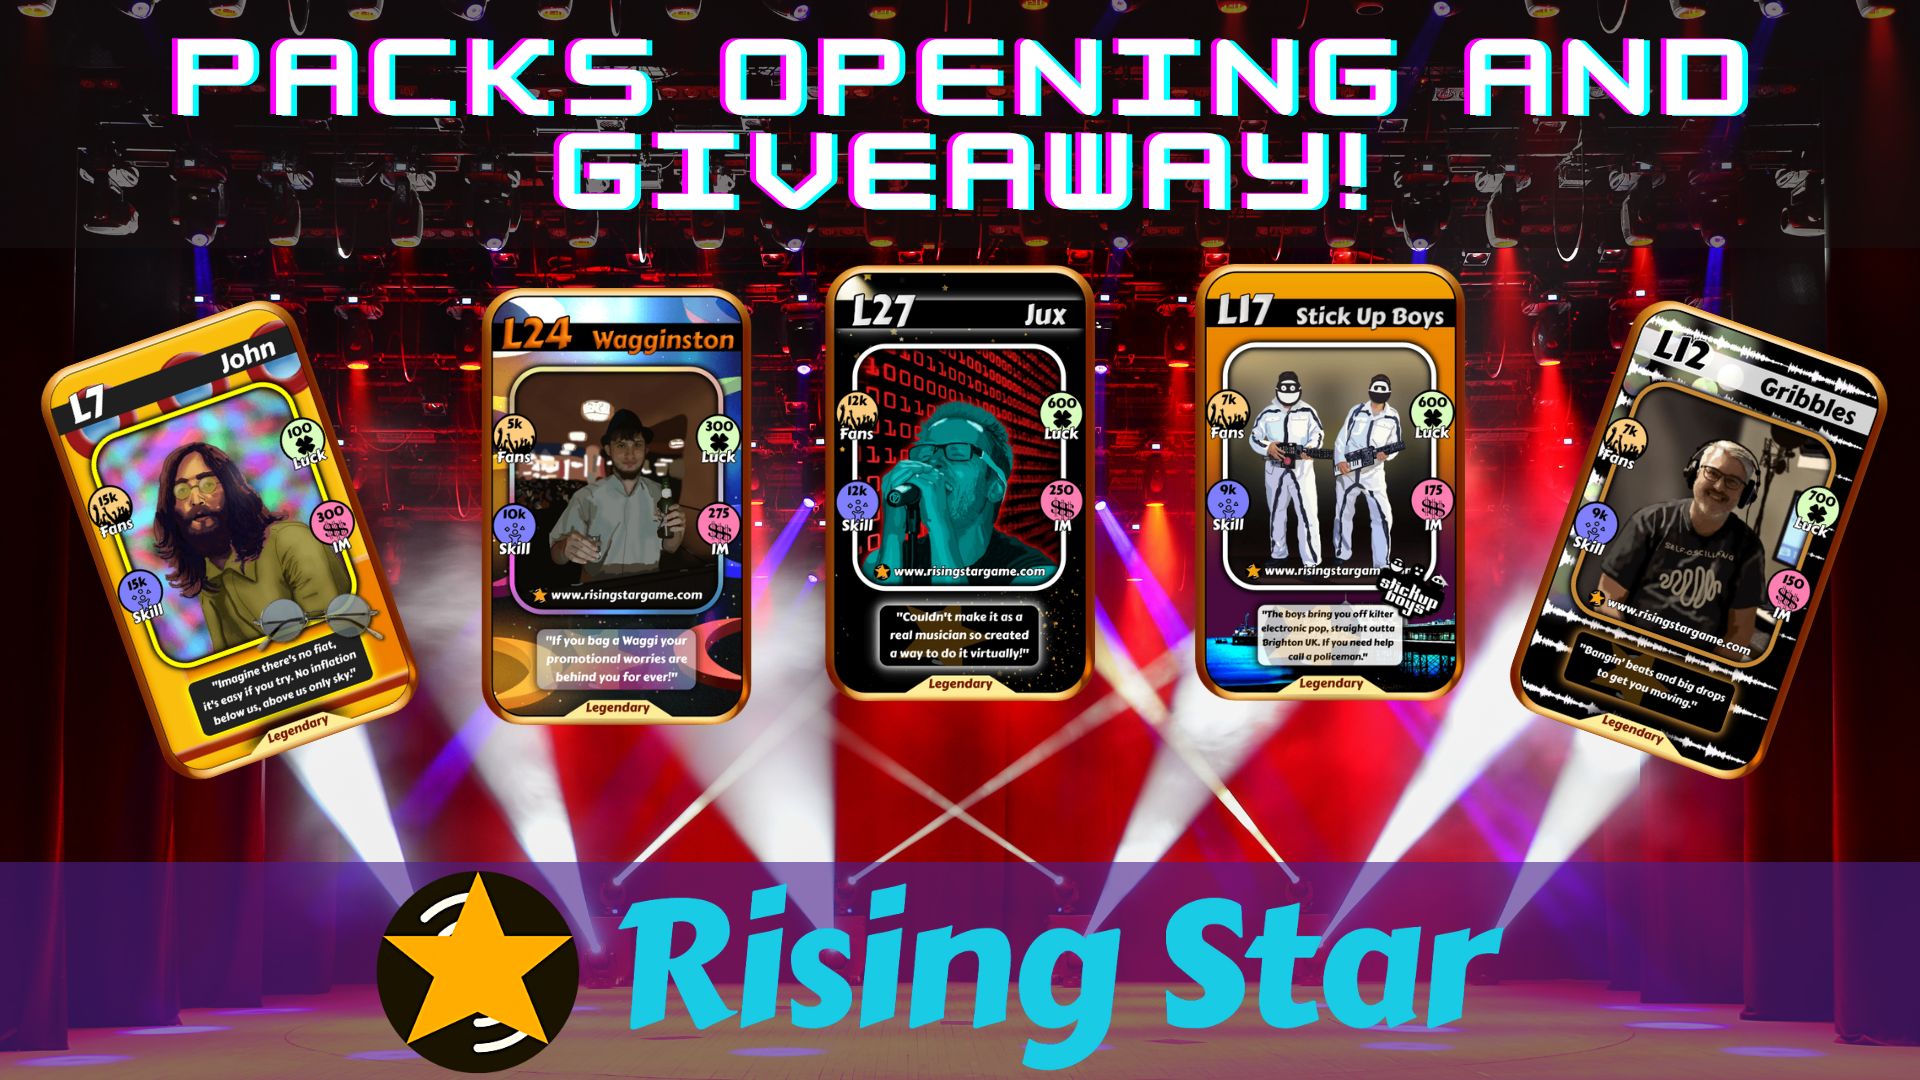 @cryptofiloz/blending-is-ready-rising-star-packs-opening-and-giveaway-167-win-nft